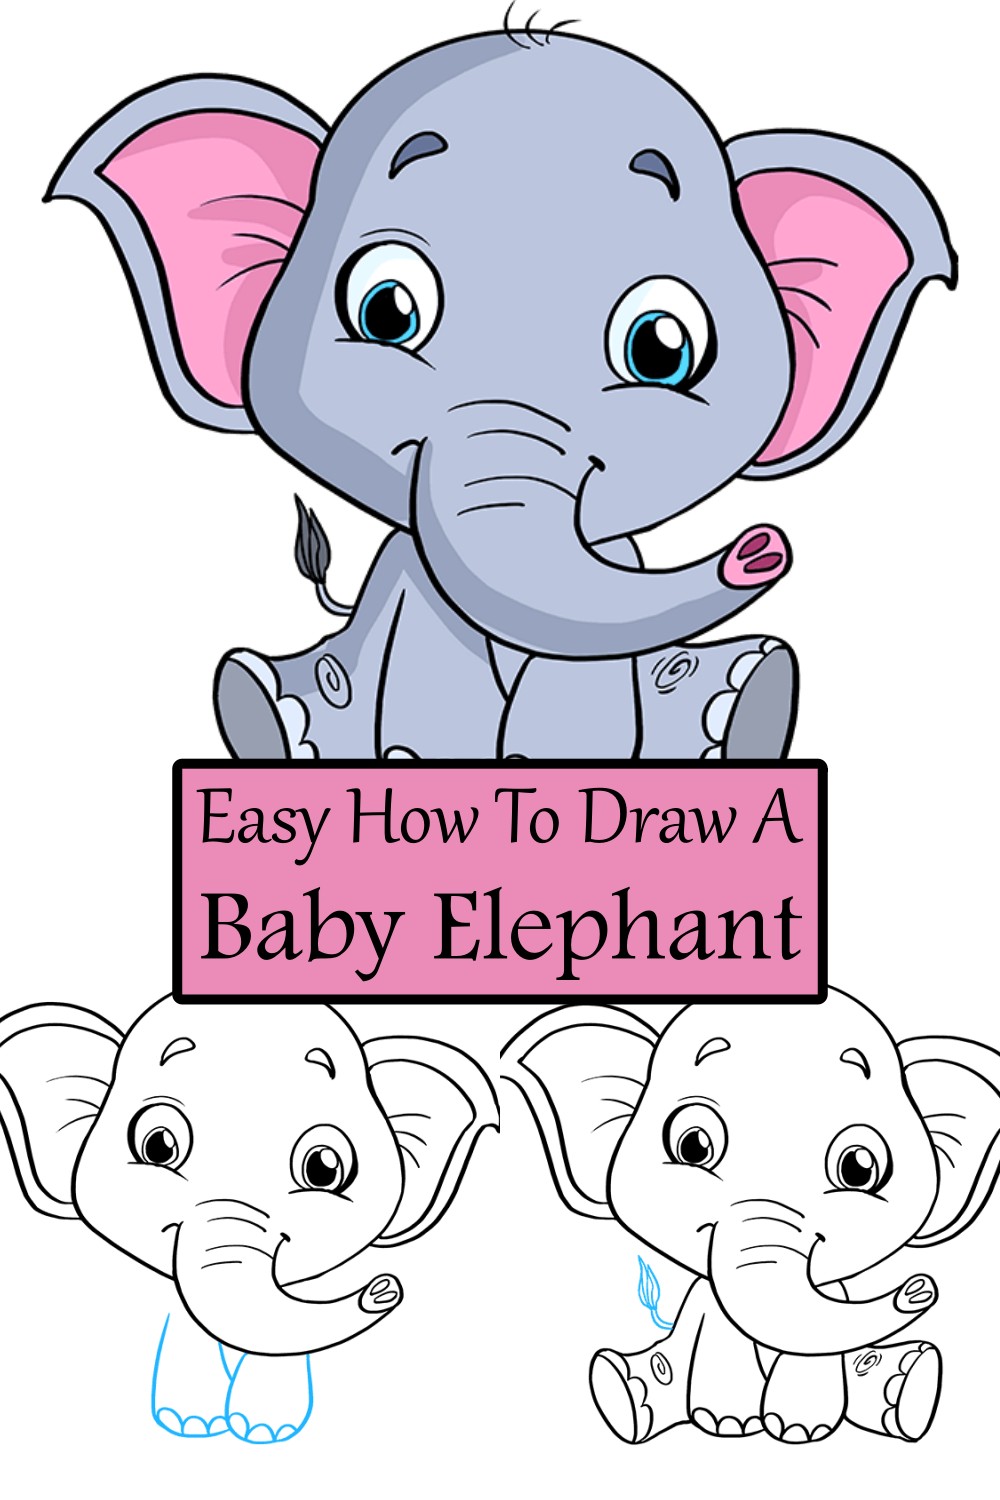 Easy How To Draw A Baby Elephant